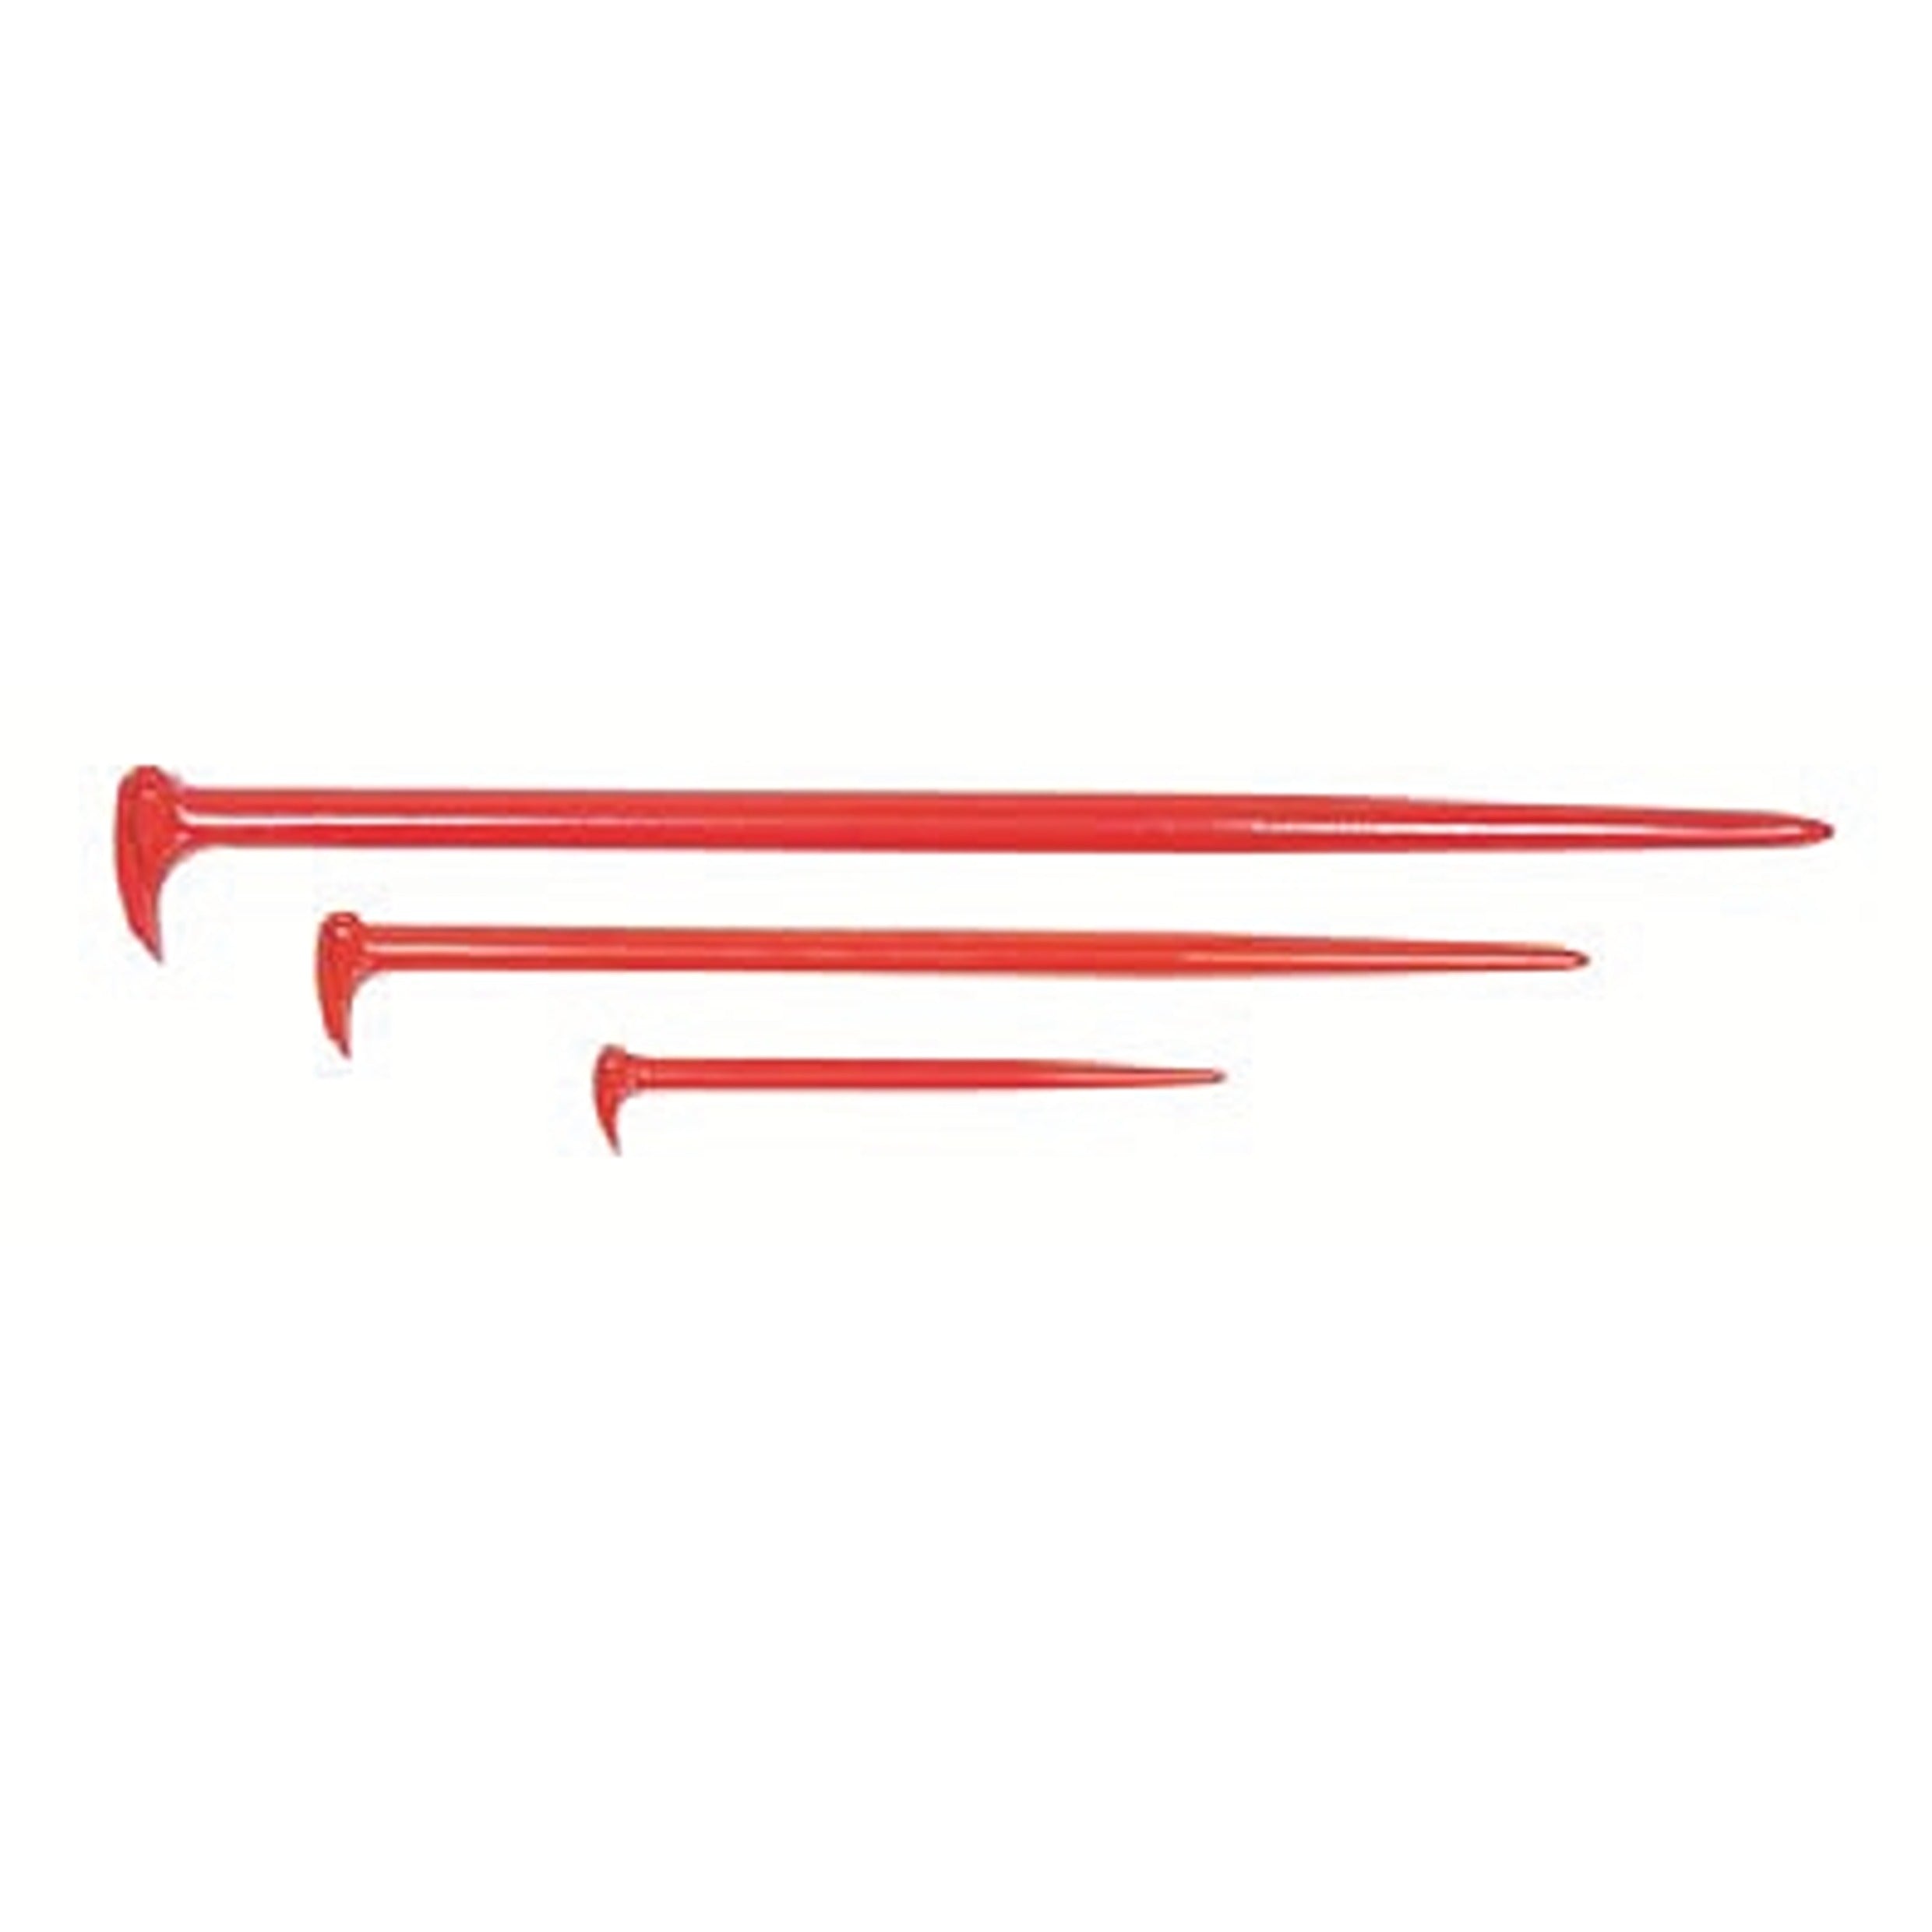 BRITOOL 217 Roll Head Pry Bars 150 x 8 mm (BRITOOL) - Premium Pry Bar from BRITOOL - Shop now at Yew Aik.